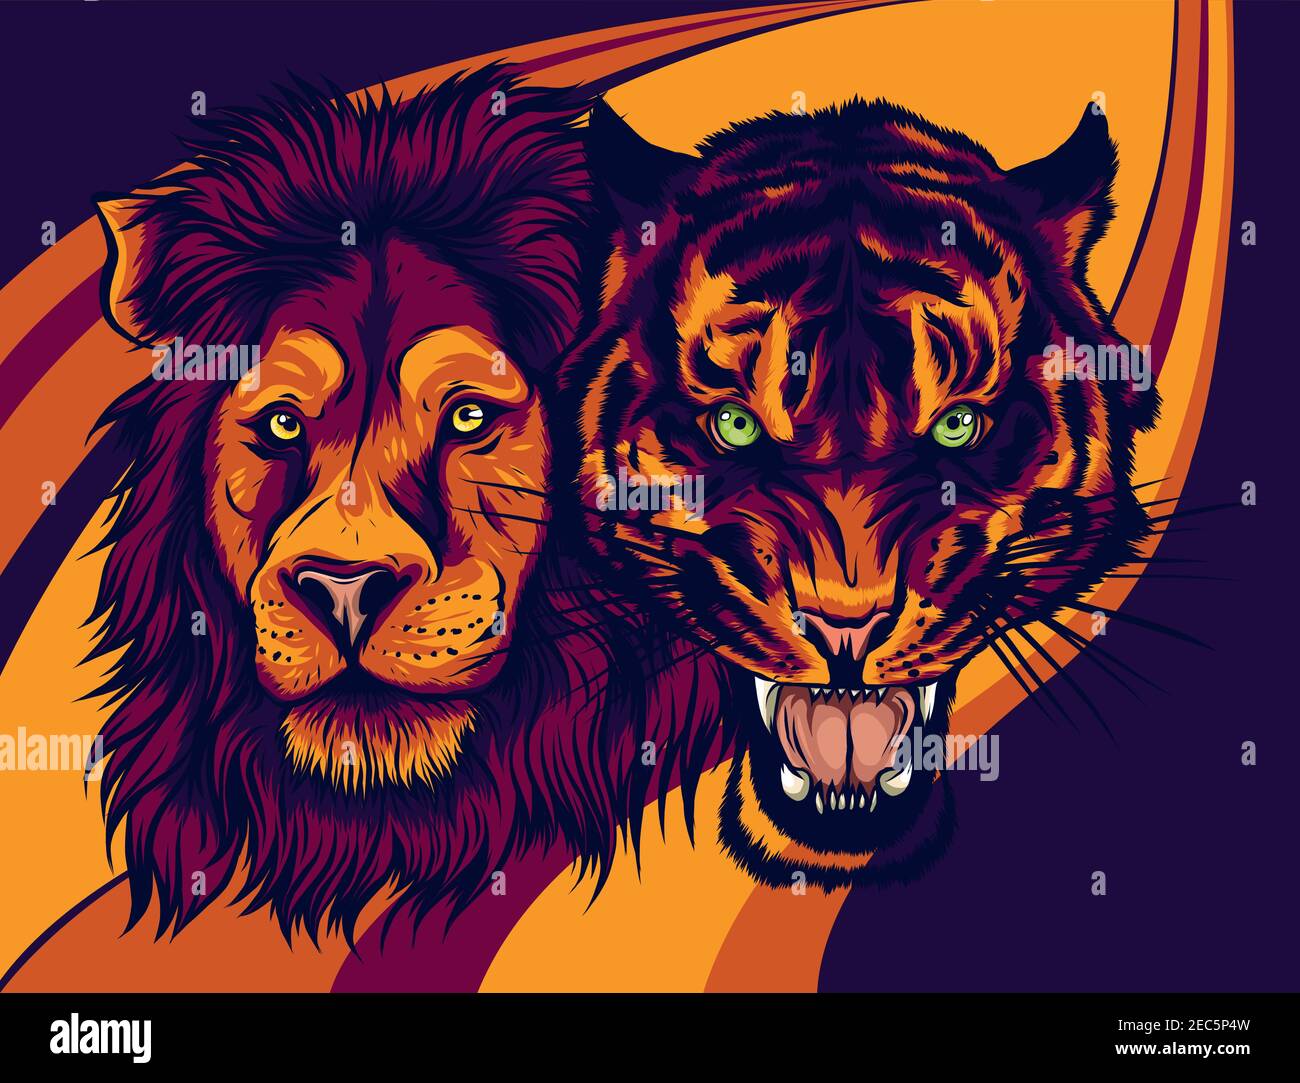 Angry Male Lion versus Angry Tiger vector illustration Stock ...